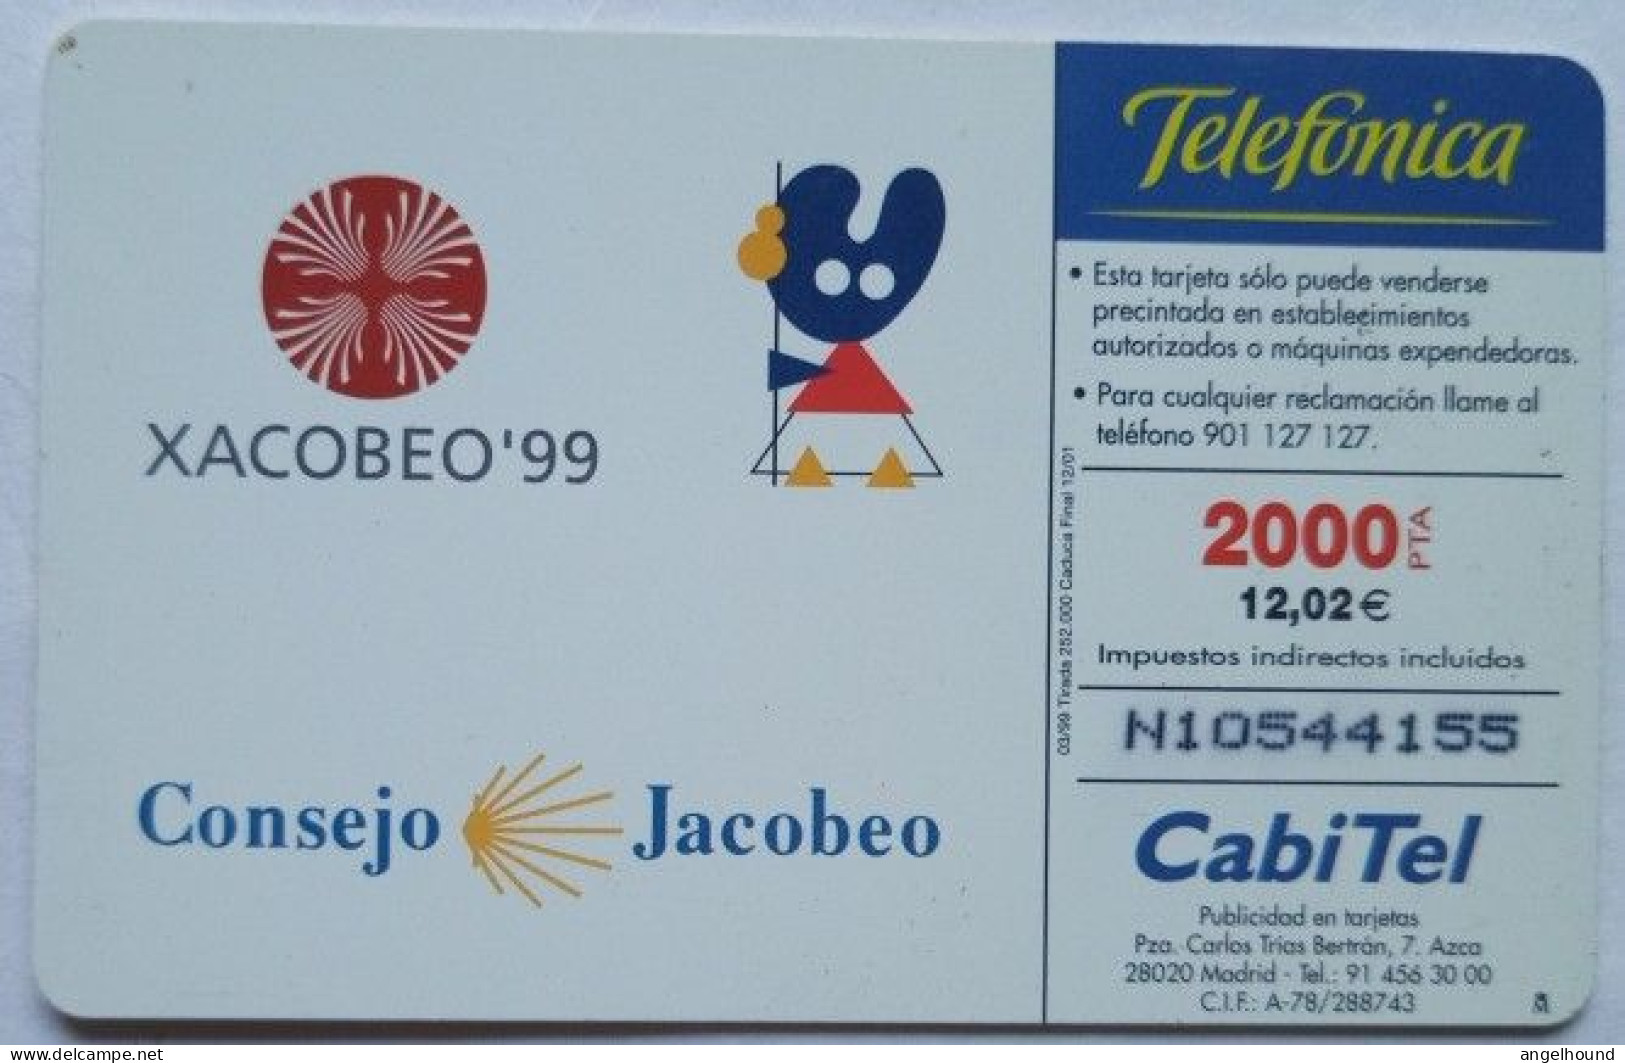 Spain 2000 + 100  Chip Card - Xacobeo  99 - Basic Issues